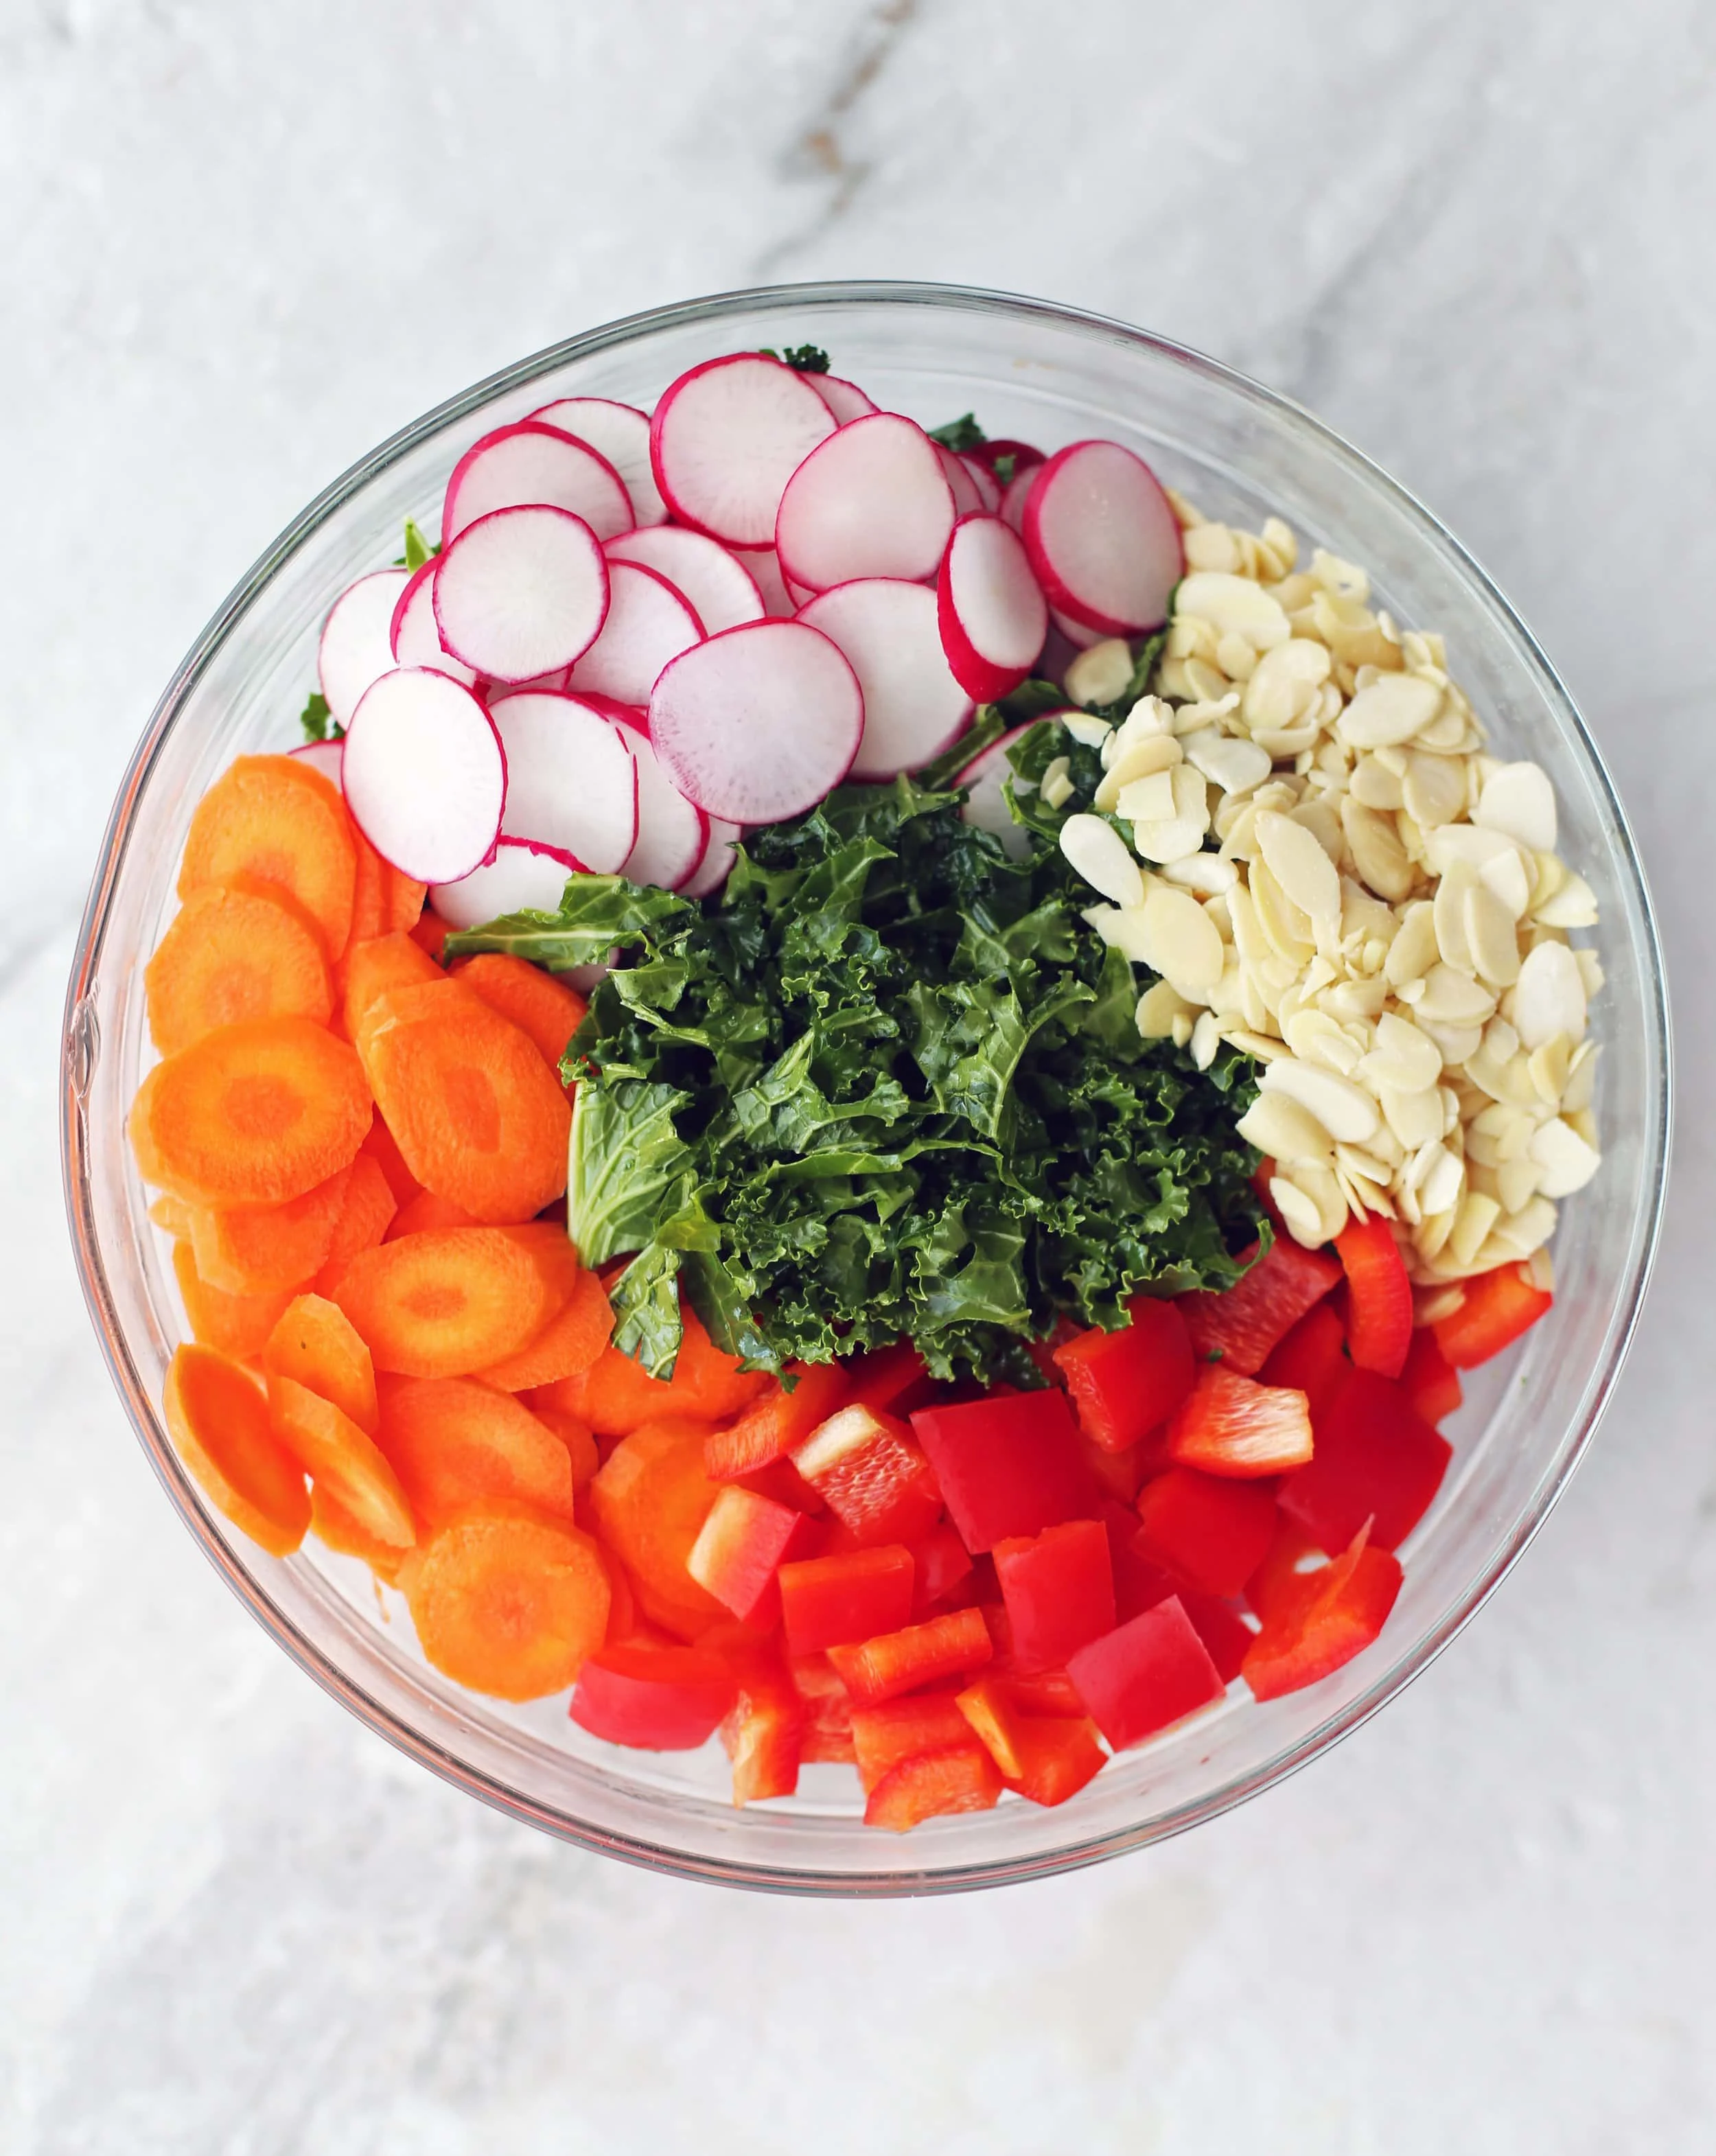 Chopped and sliced kale, carrots, bell pepper, radishes, and sliced almonds in a large glass bowl.